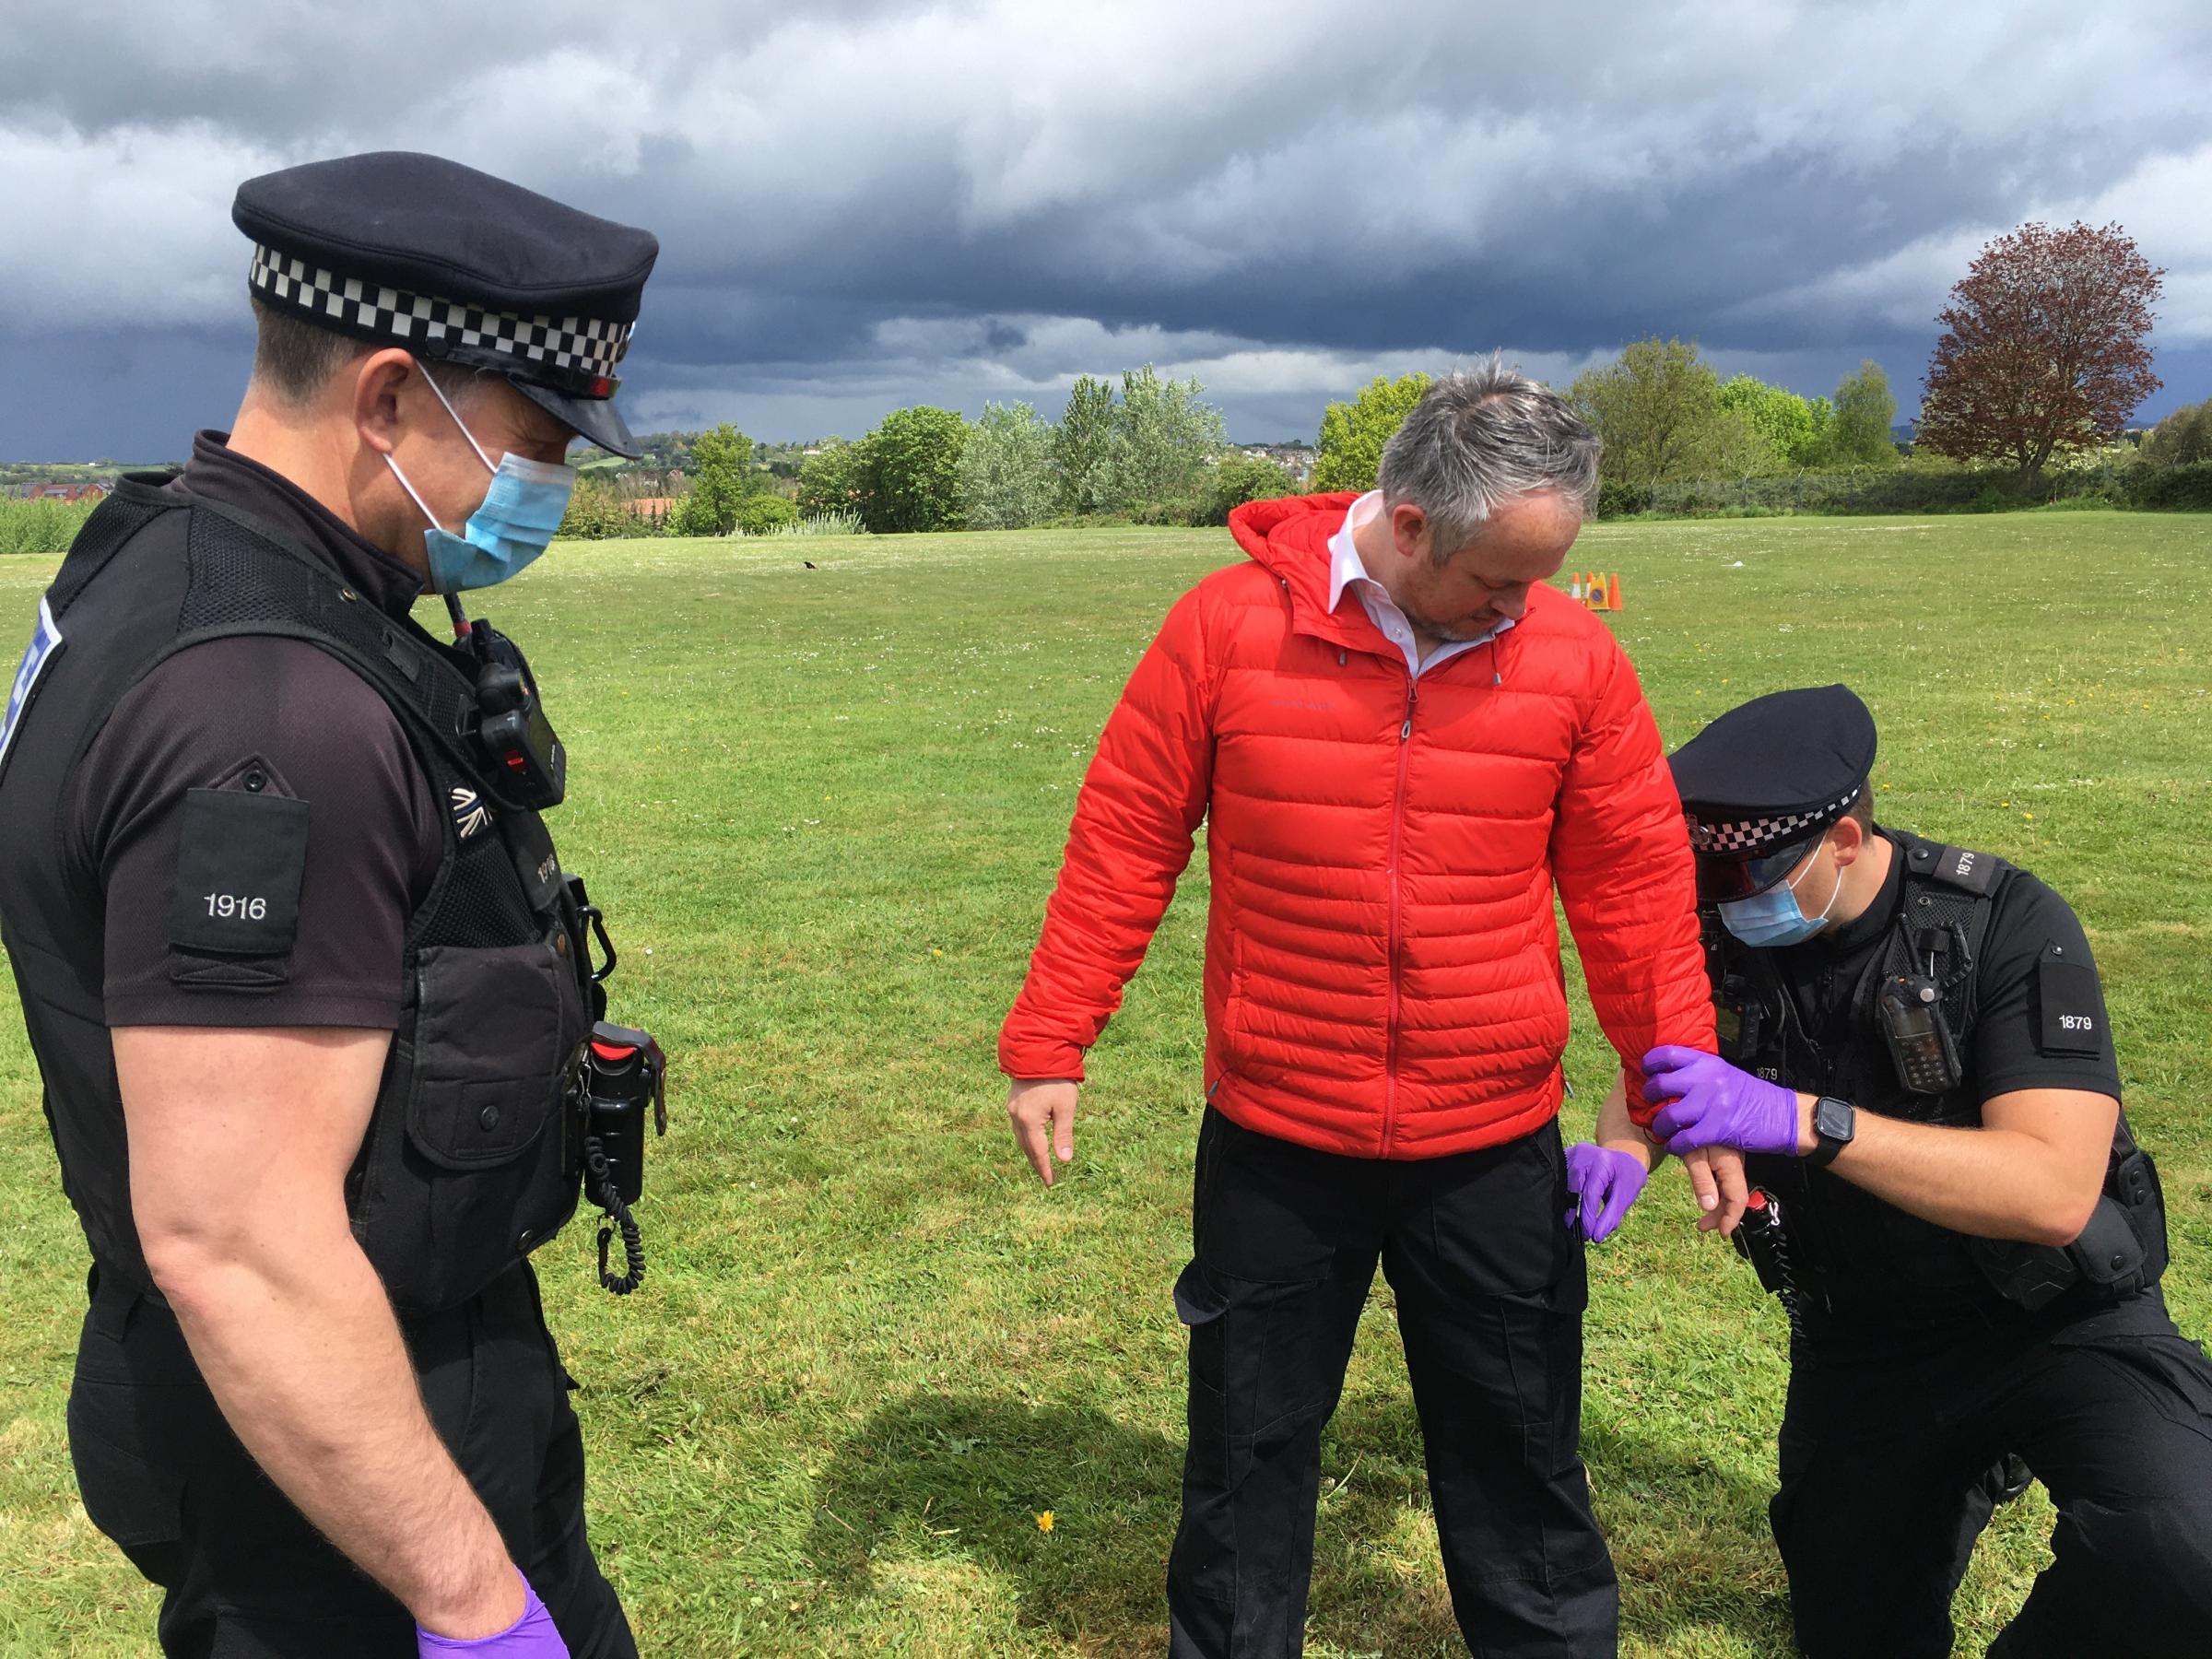 Devon and Cornwall police officers demonstrate how they would search an individual ahead of the G7 summit (Image: LDRS/Richard Whitehouse)